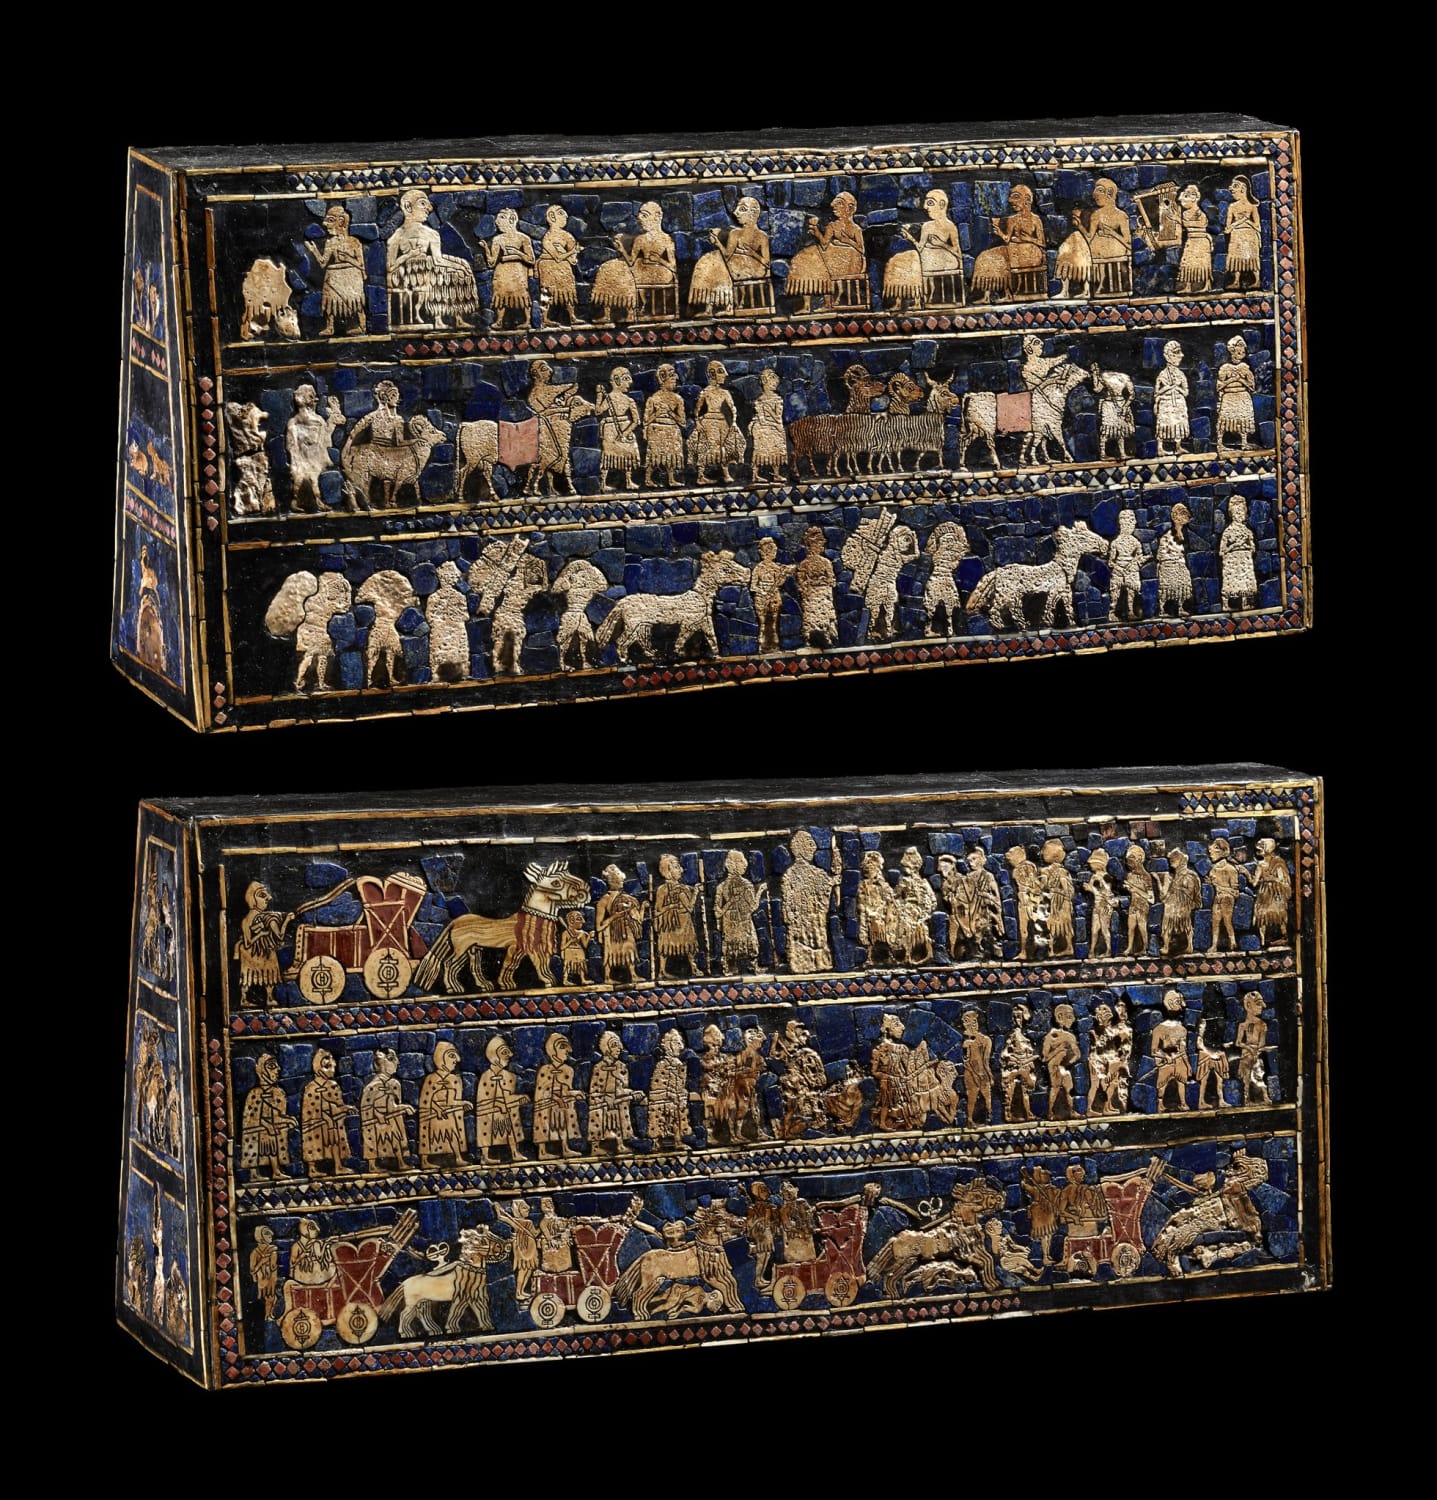 This finely decorated object was made around 2500 BC in ancient Mesopotamia. The inlaid mosaic shows a battle scene on one side, with the victory banquet or ritual celebration on the other